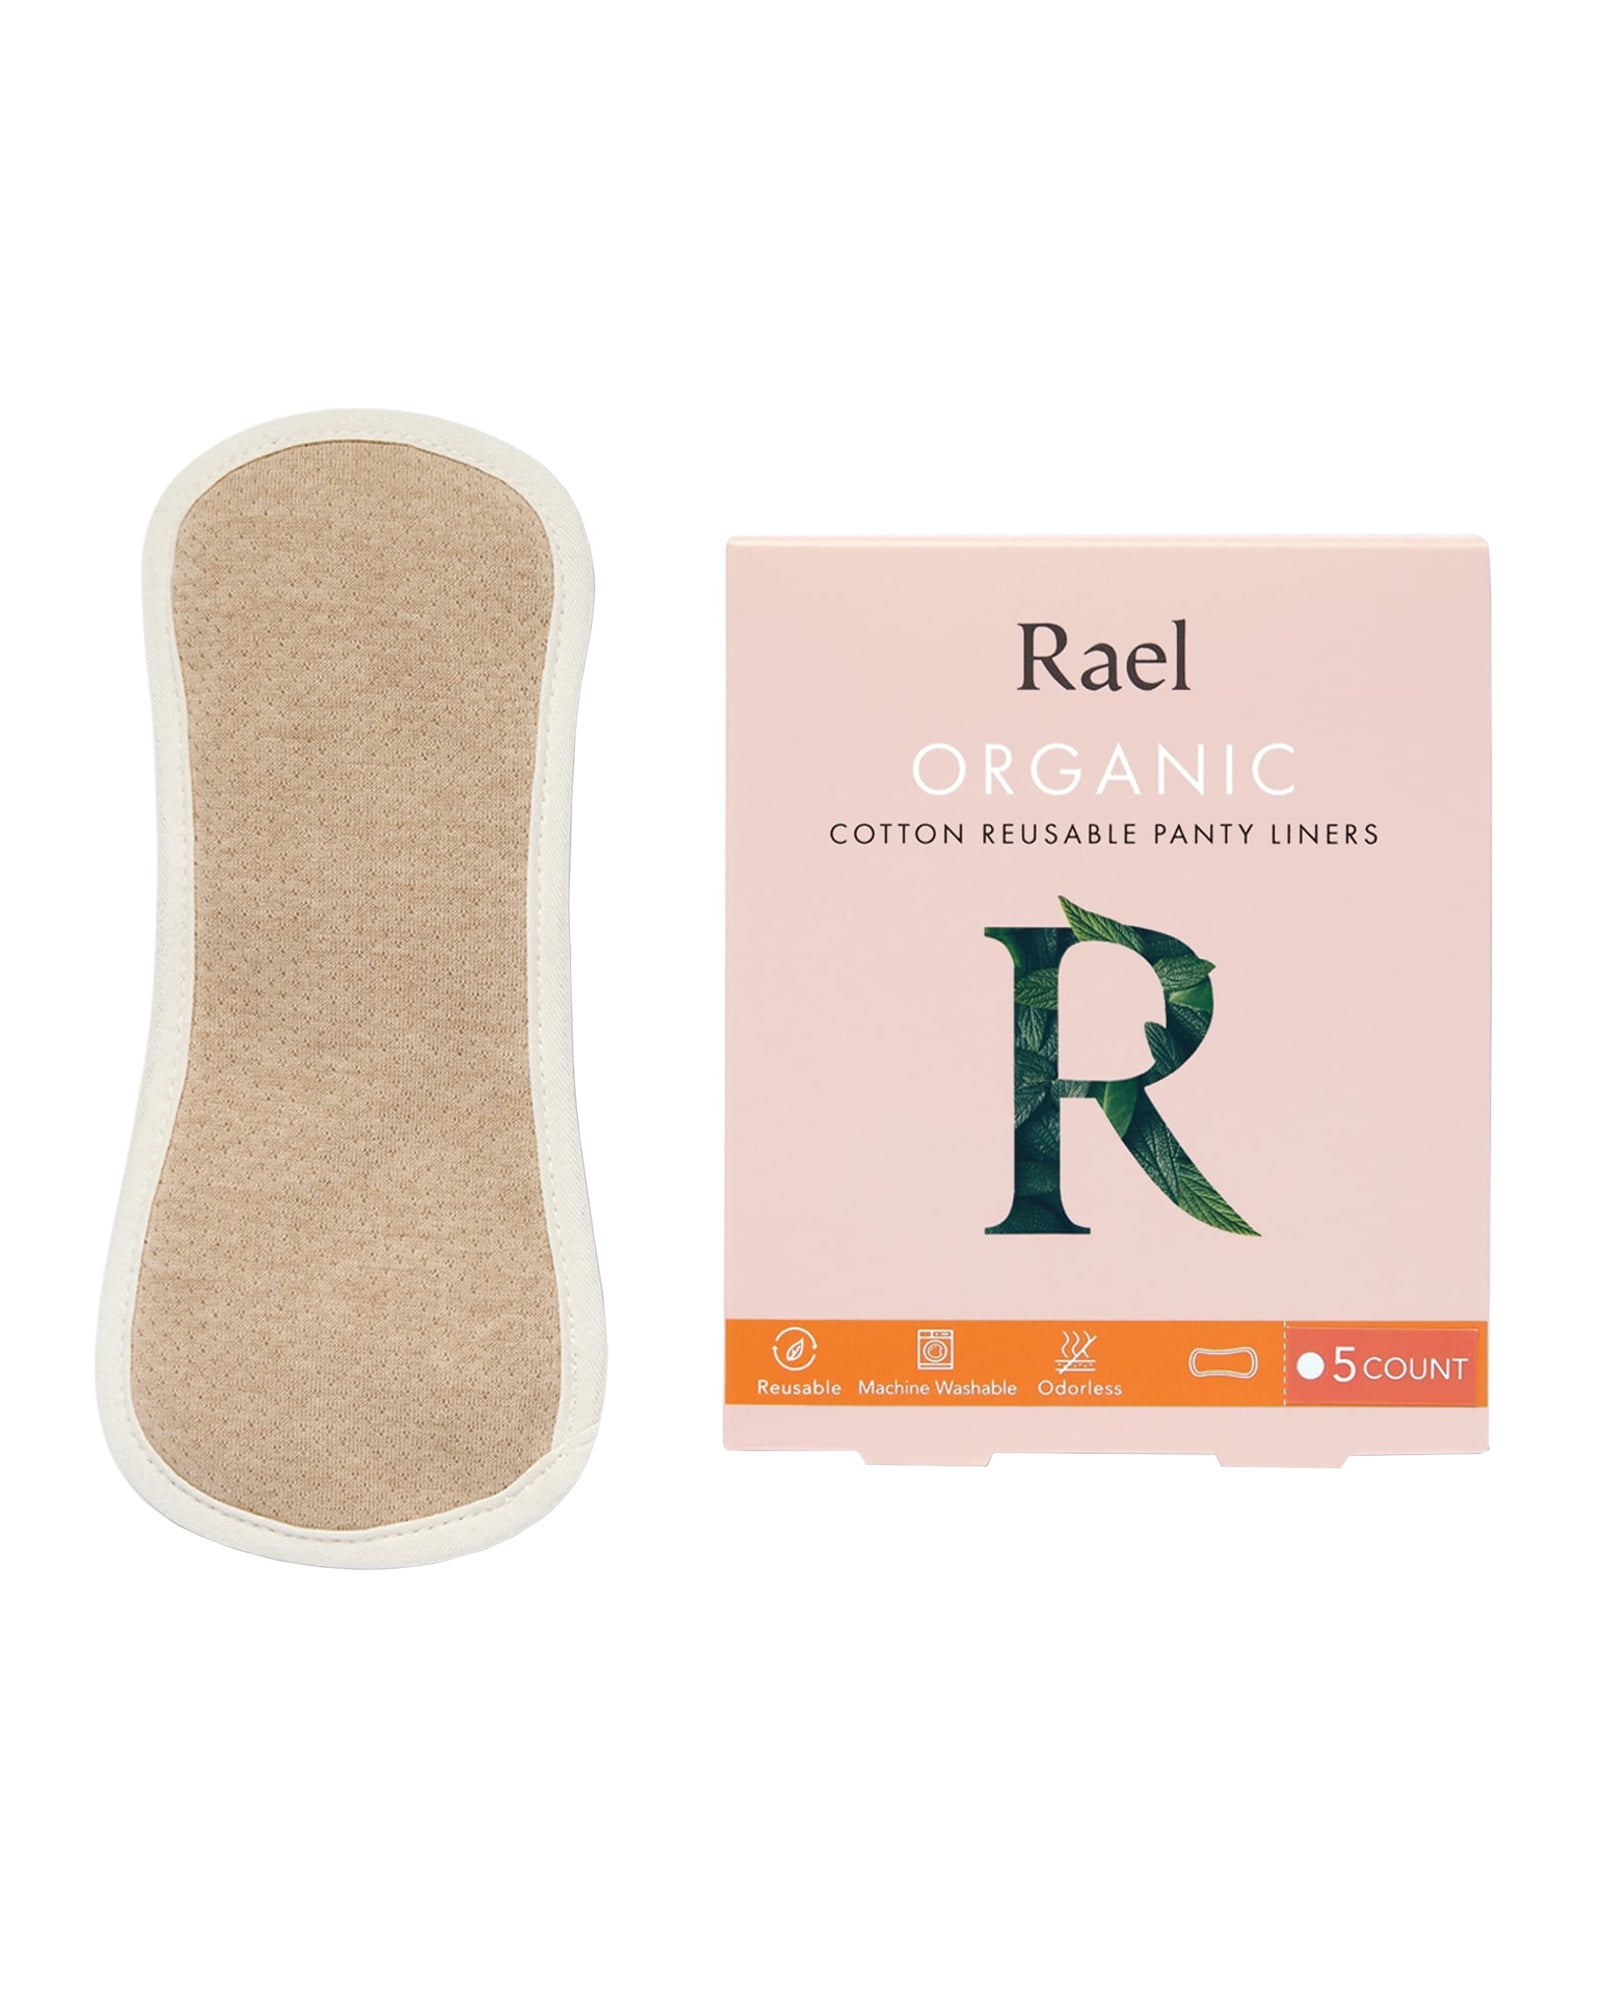 Get Organic Chemical Free Cotton Panty Liners Online